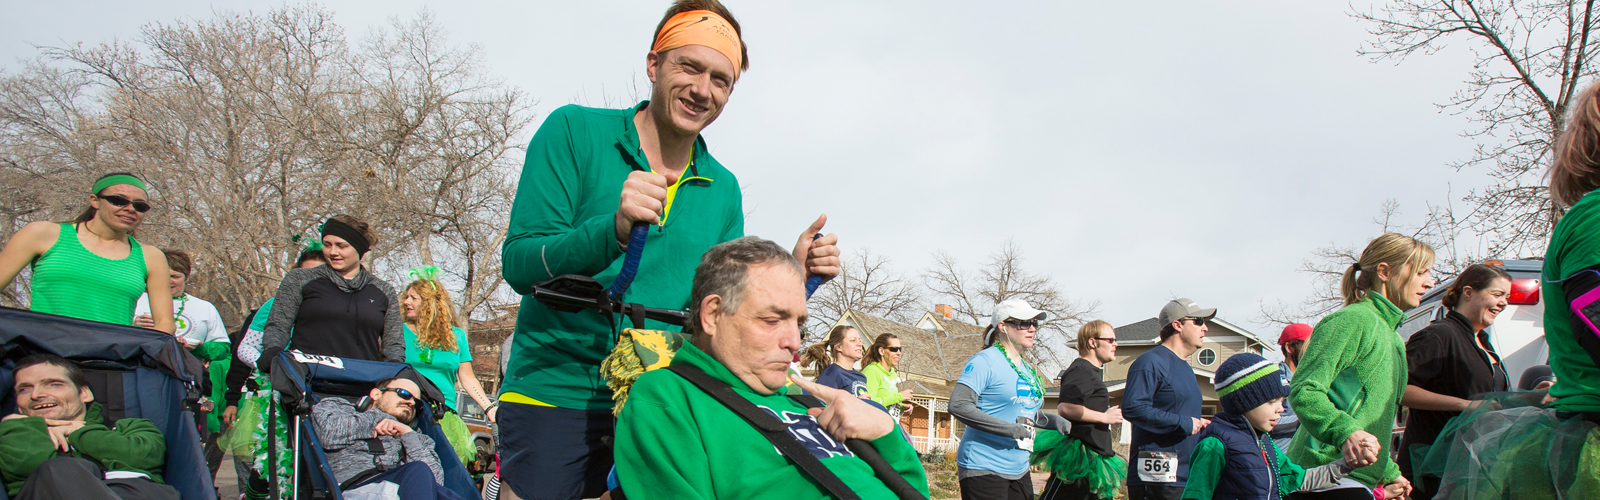 A young man wearing a green pullover and orange bandana on his head pushes an older man, also wearing a green sweatshirt, in a road race.